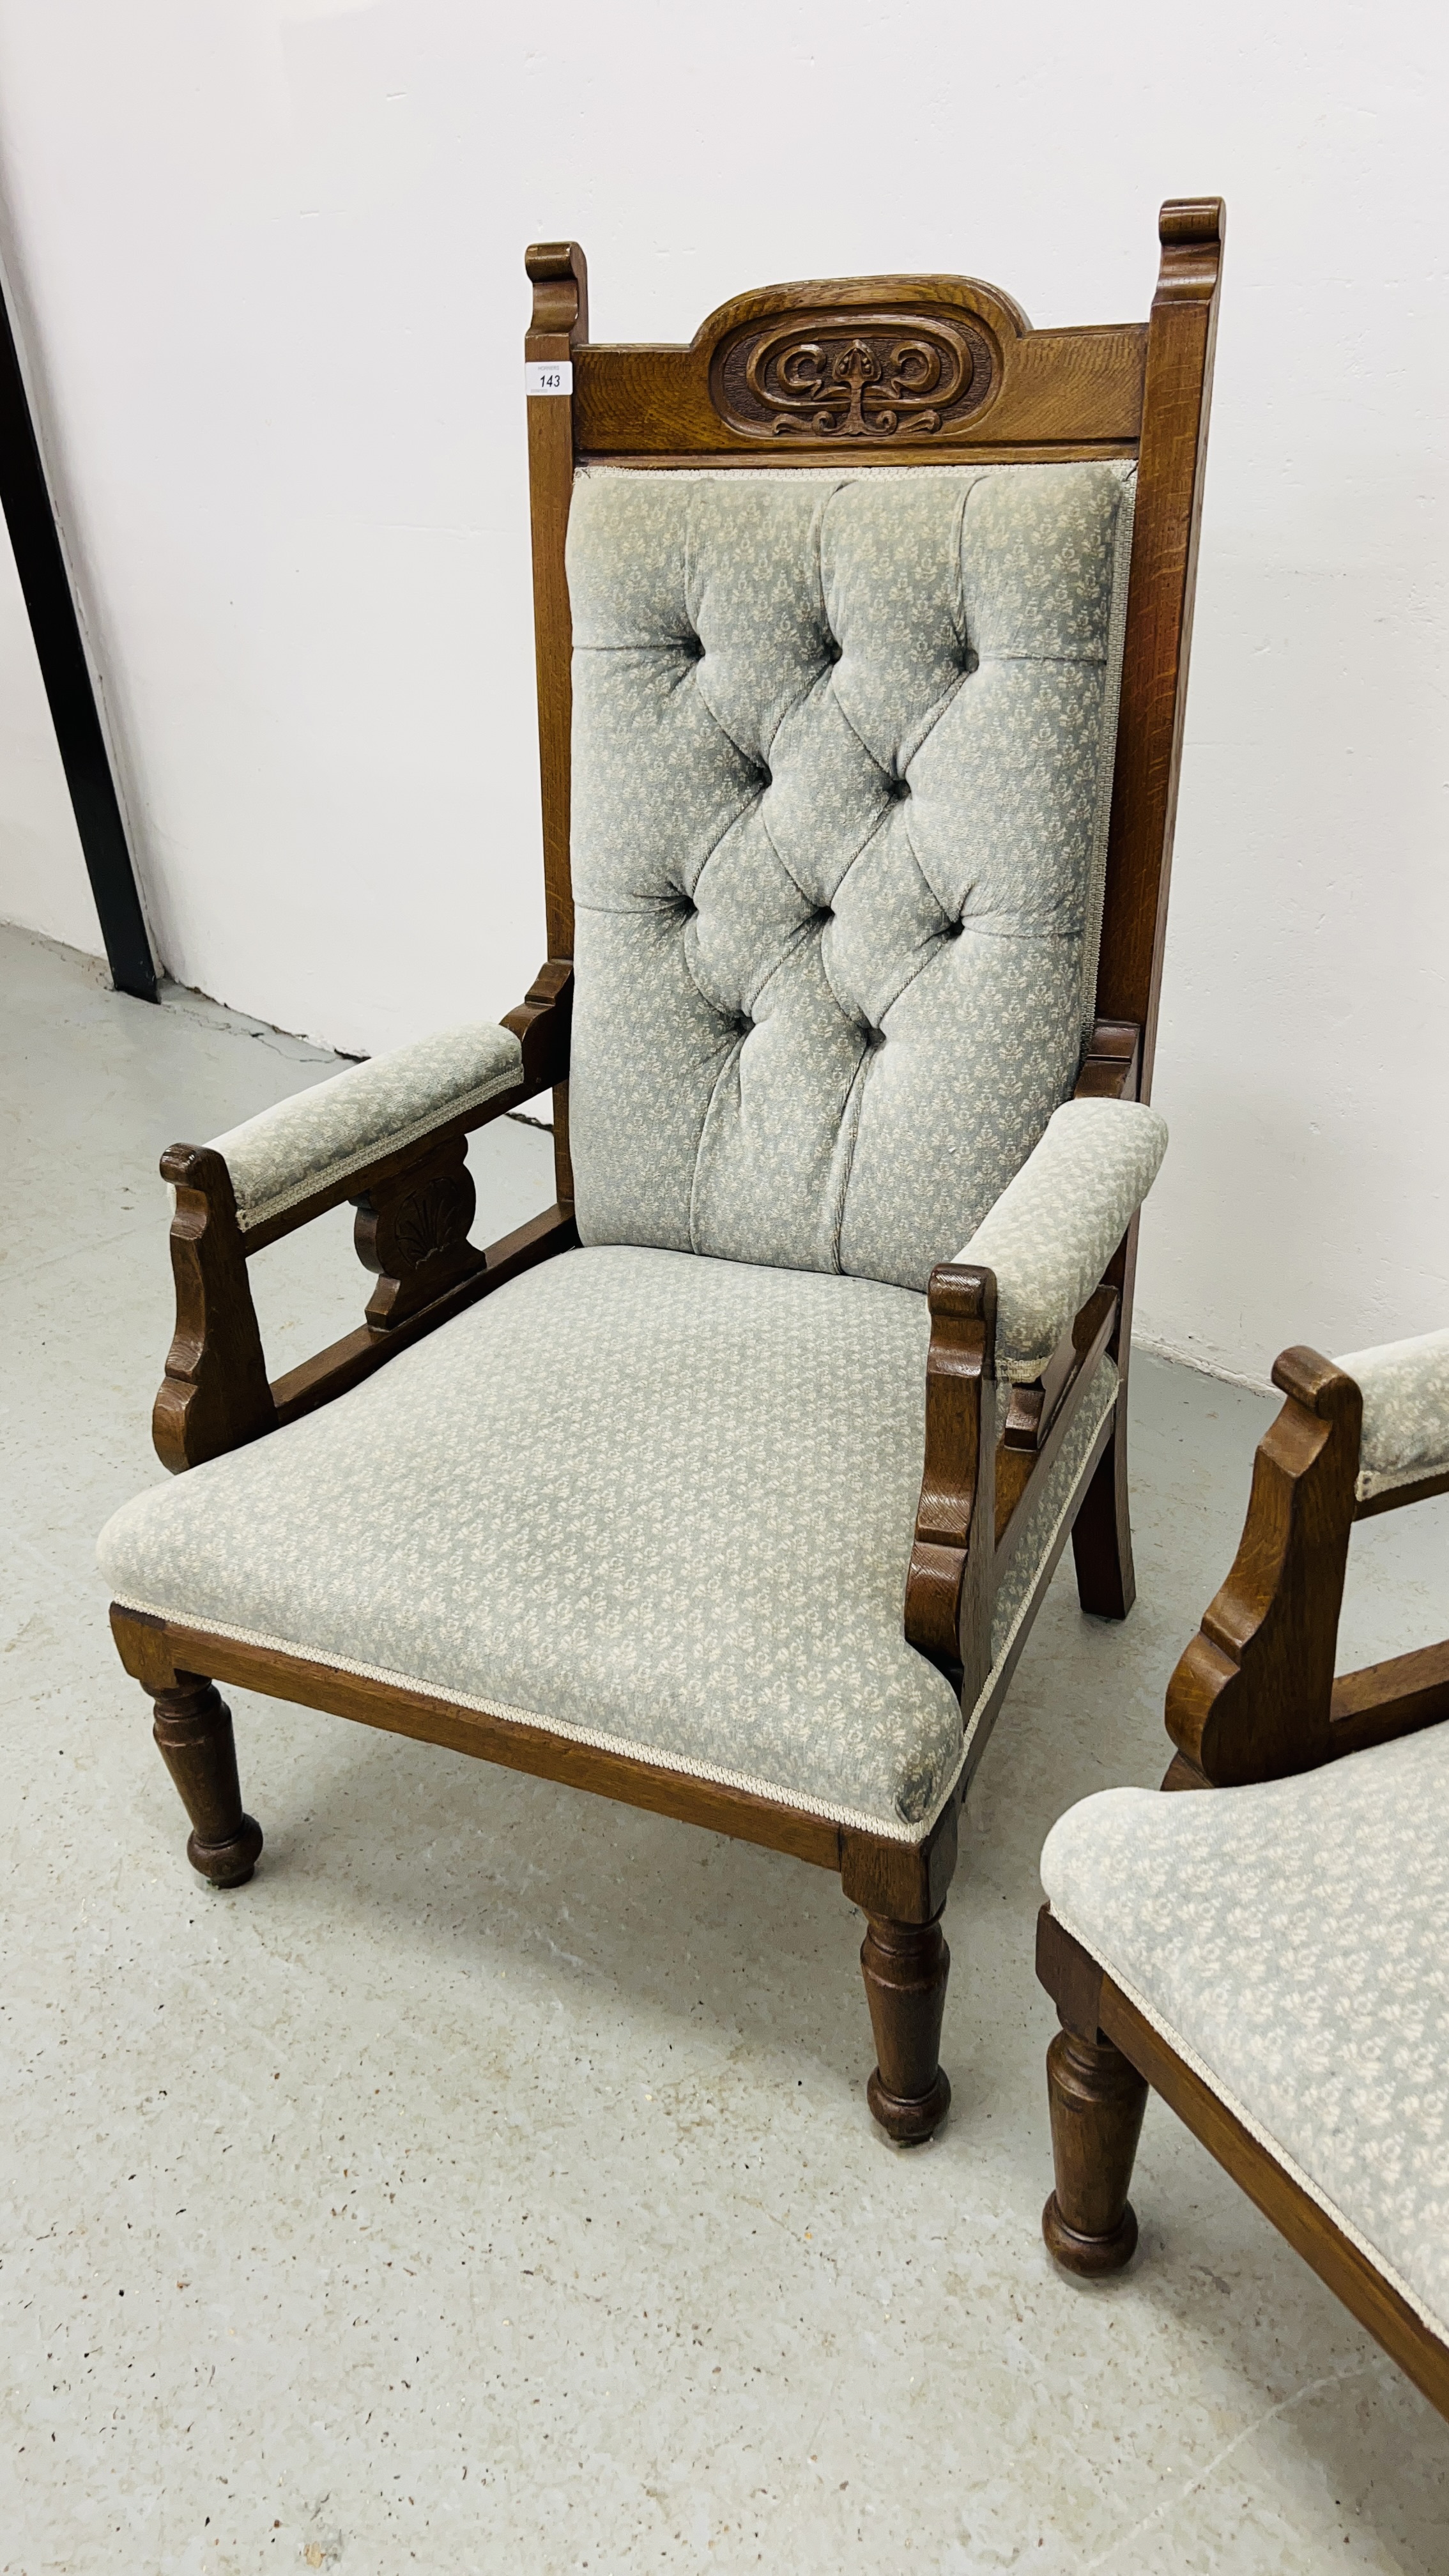 A PAIR OF EDWARDIAN OAK LOW SEAT CHAIRS UPHOLSTERED IN PASTEL BLUE - Image 8 of 11